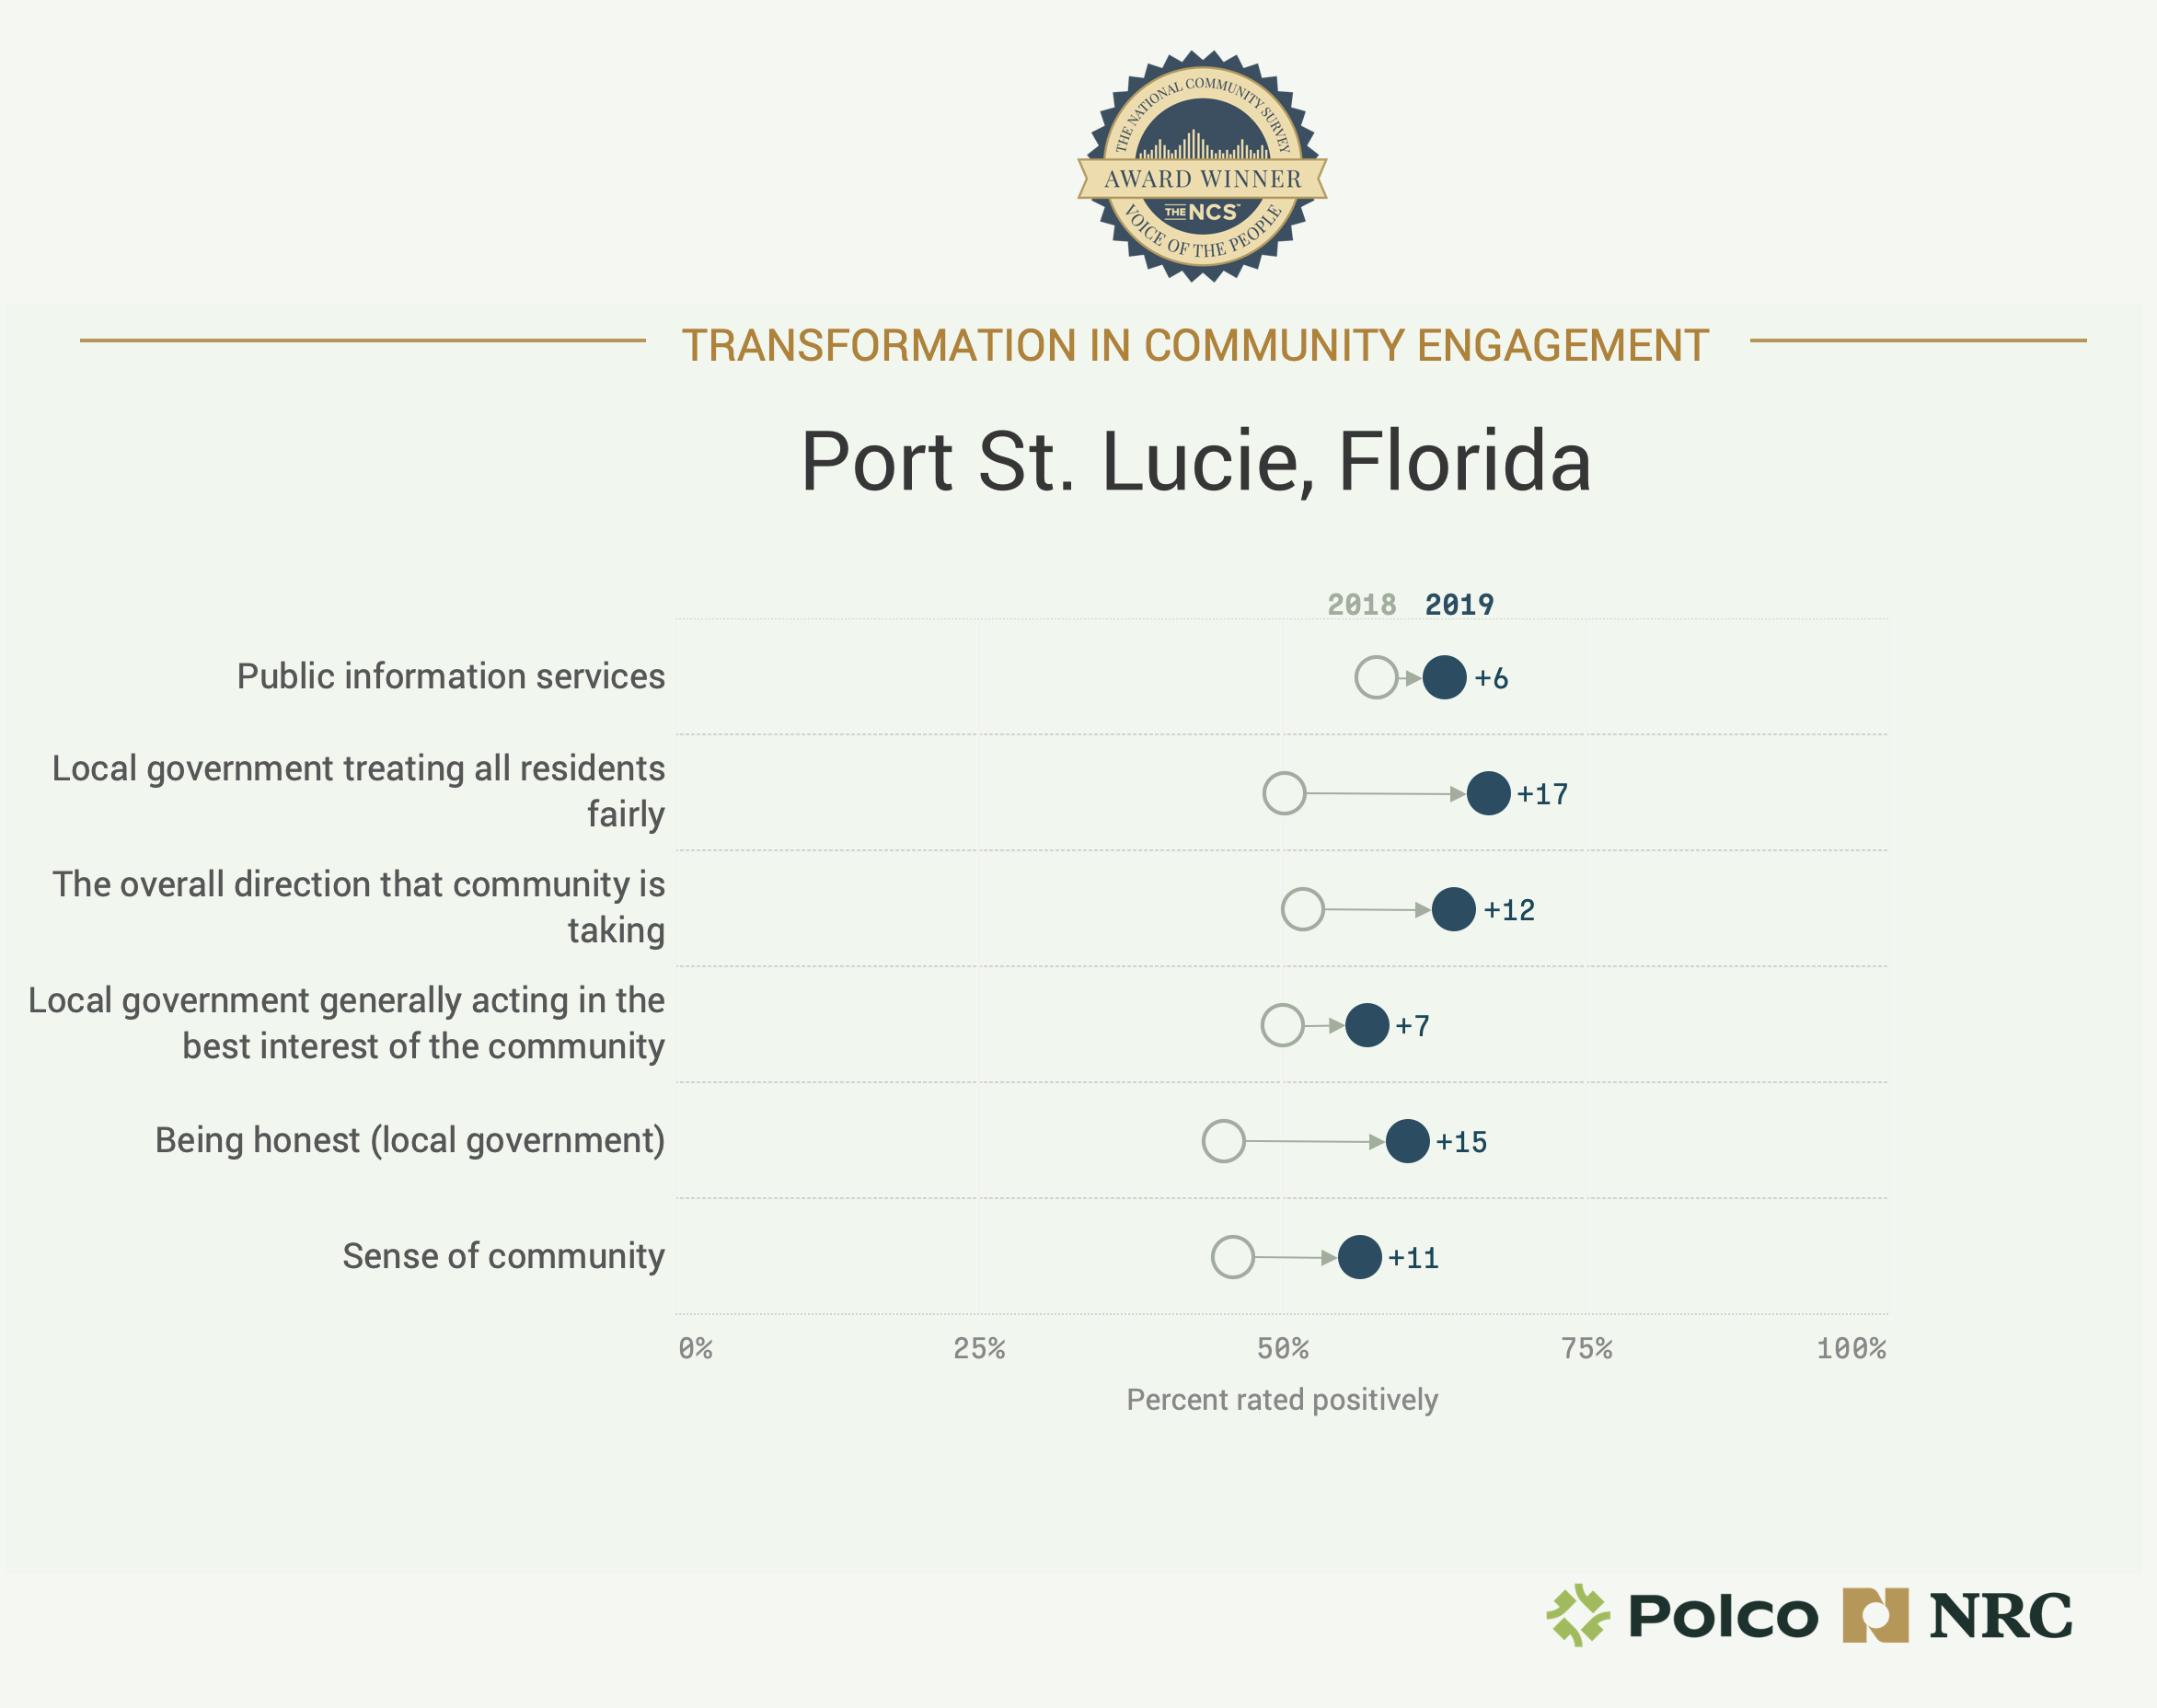 Chart showing Port St. Lucie's Transformation in Community Engagement